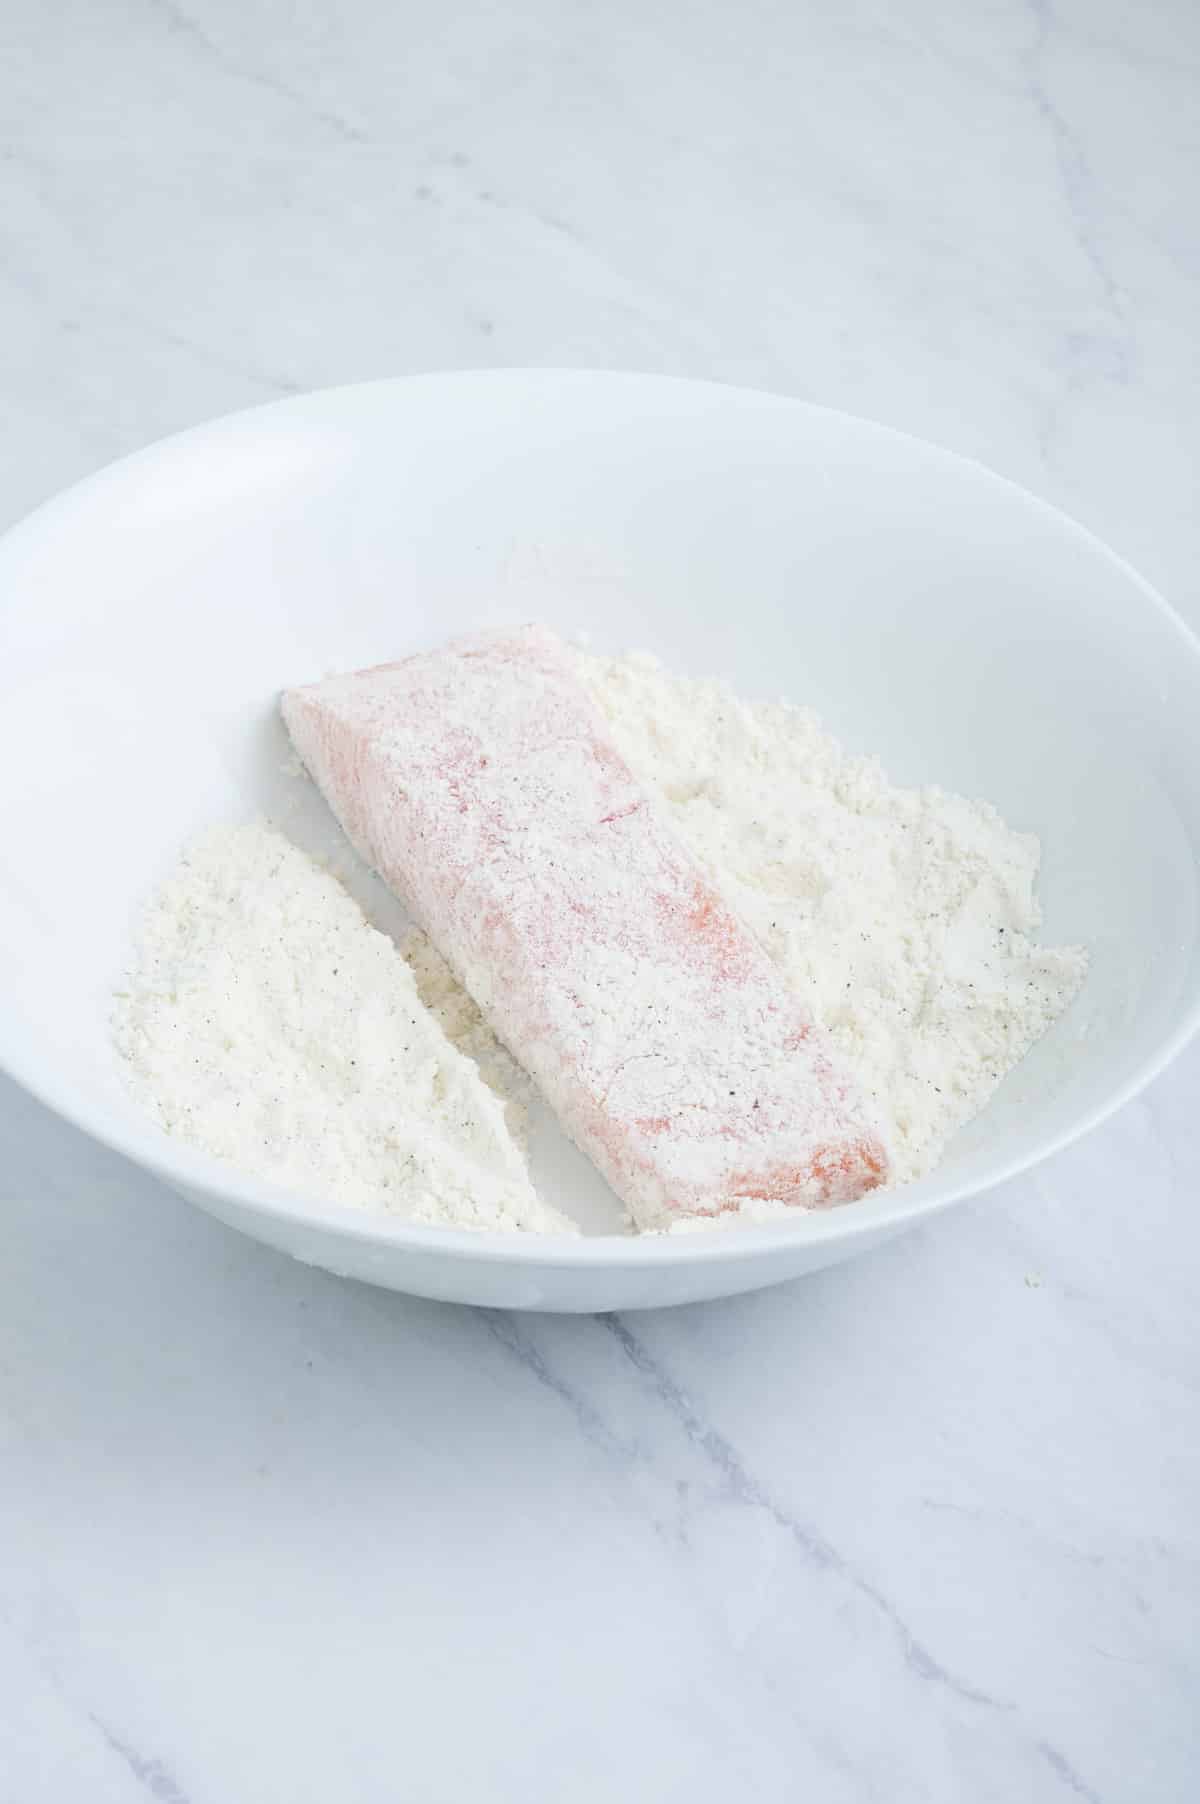 Salmon is dredged in flour.